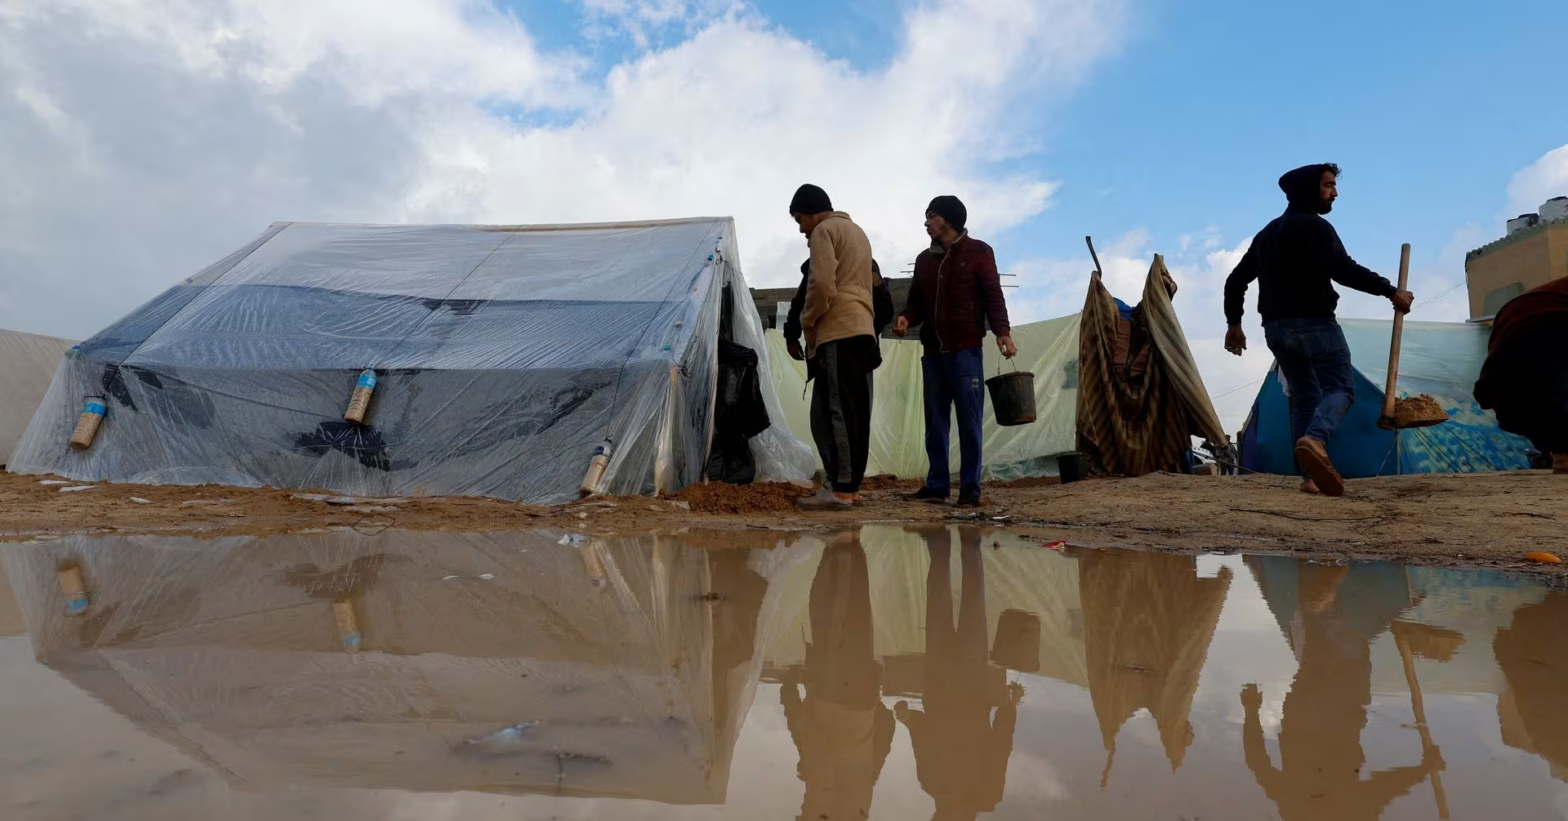 Torrential rainfall and flooding pile on misery to displaced Gazans